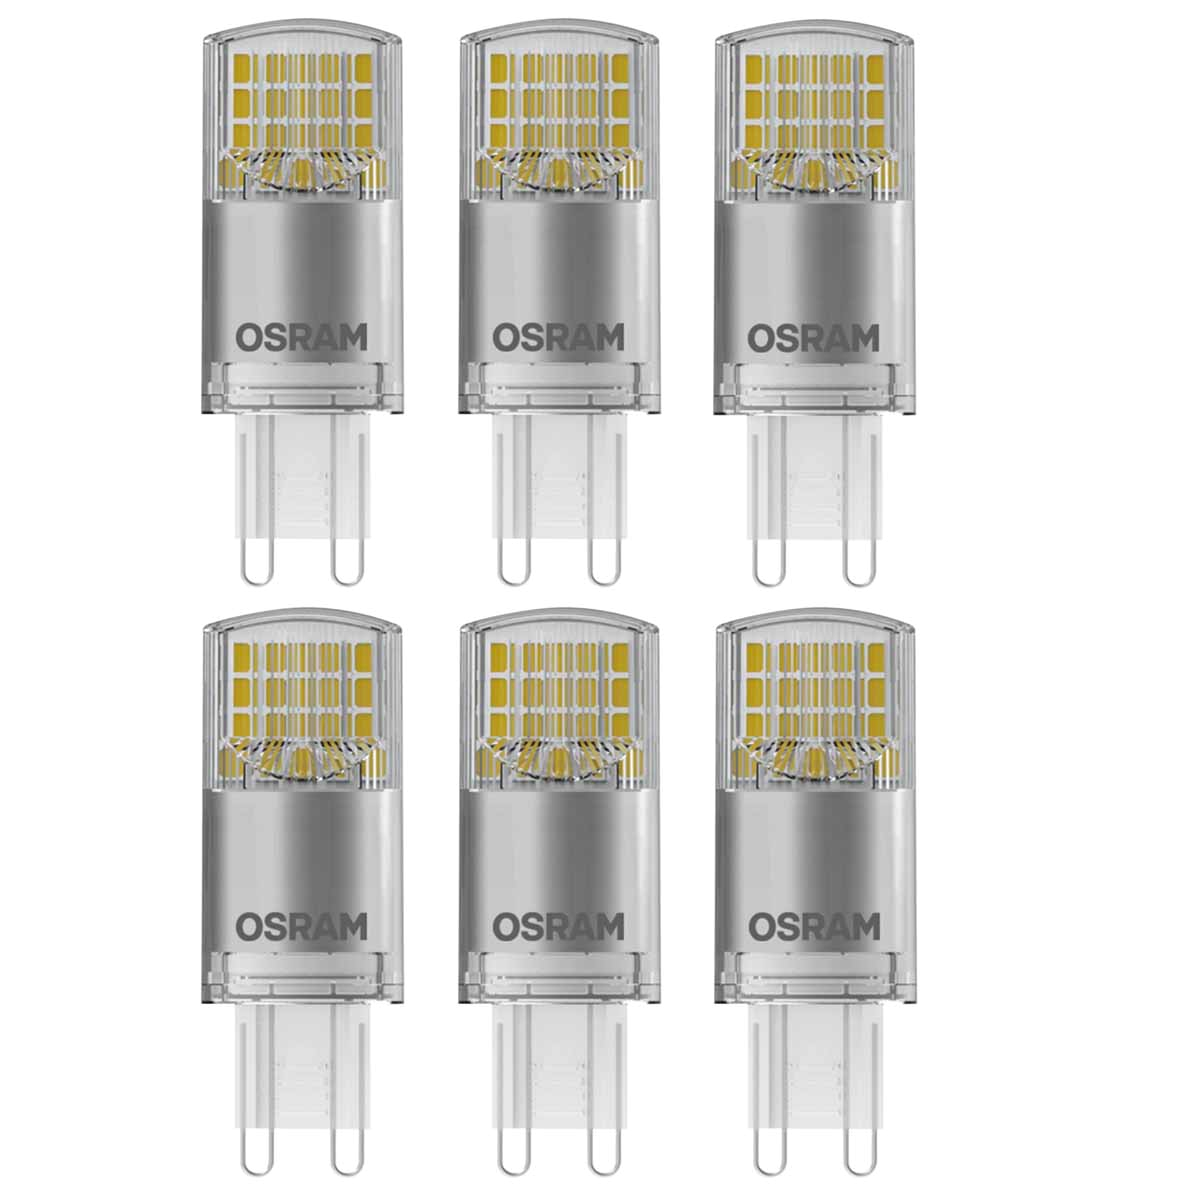 osram led superstar pin 32 dimmable 300a g9 3 5w 32w 350lm warm white 2700k 6er led de